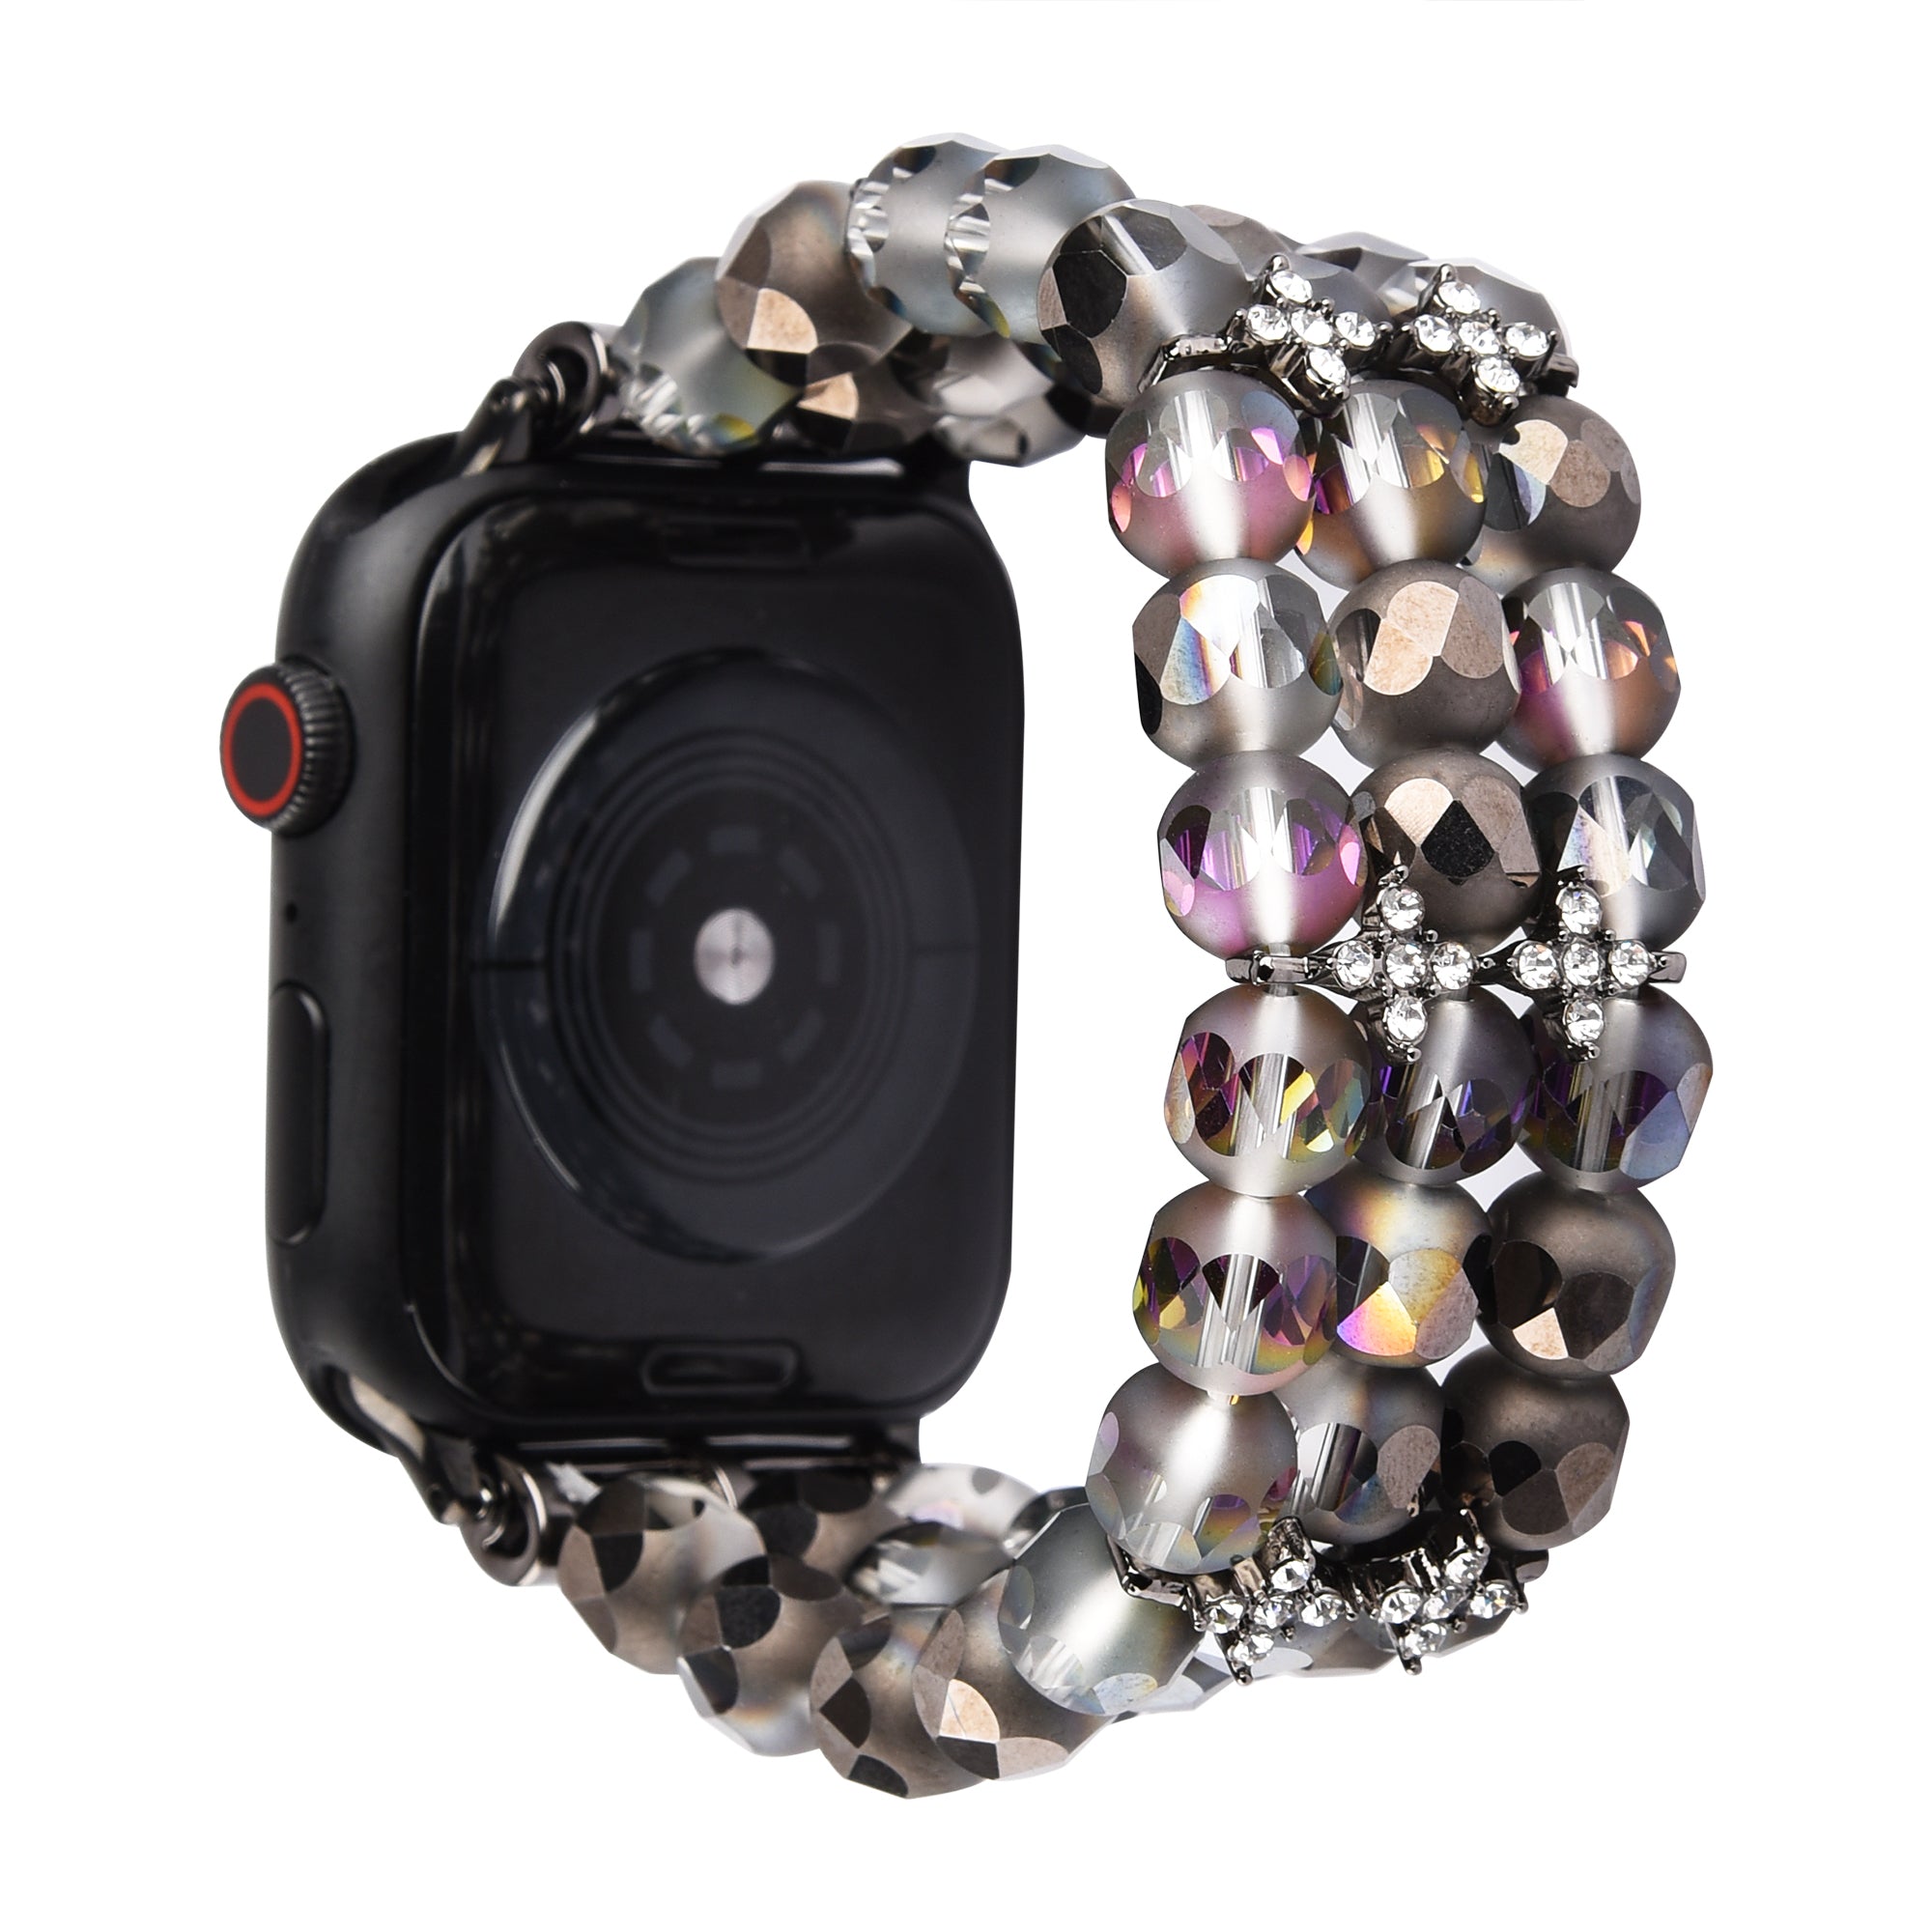 Flower Shape Decor Crystal Beads Design Replacement Watch Strap Wrist Band for Apple Watch Series 8 41mm / Series 7 41mm / Series 6 / 5 / 4 / SE / SE(2022) 40mm / Watch Series 1 / 2 / 3 38mm - Black